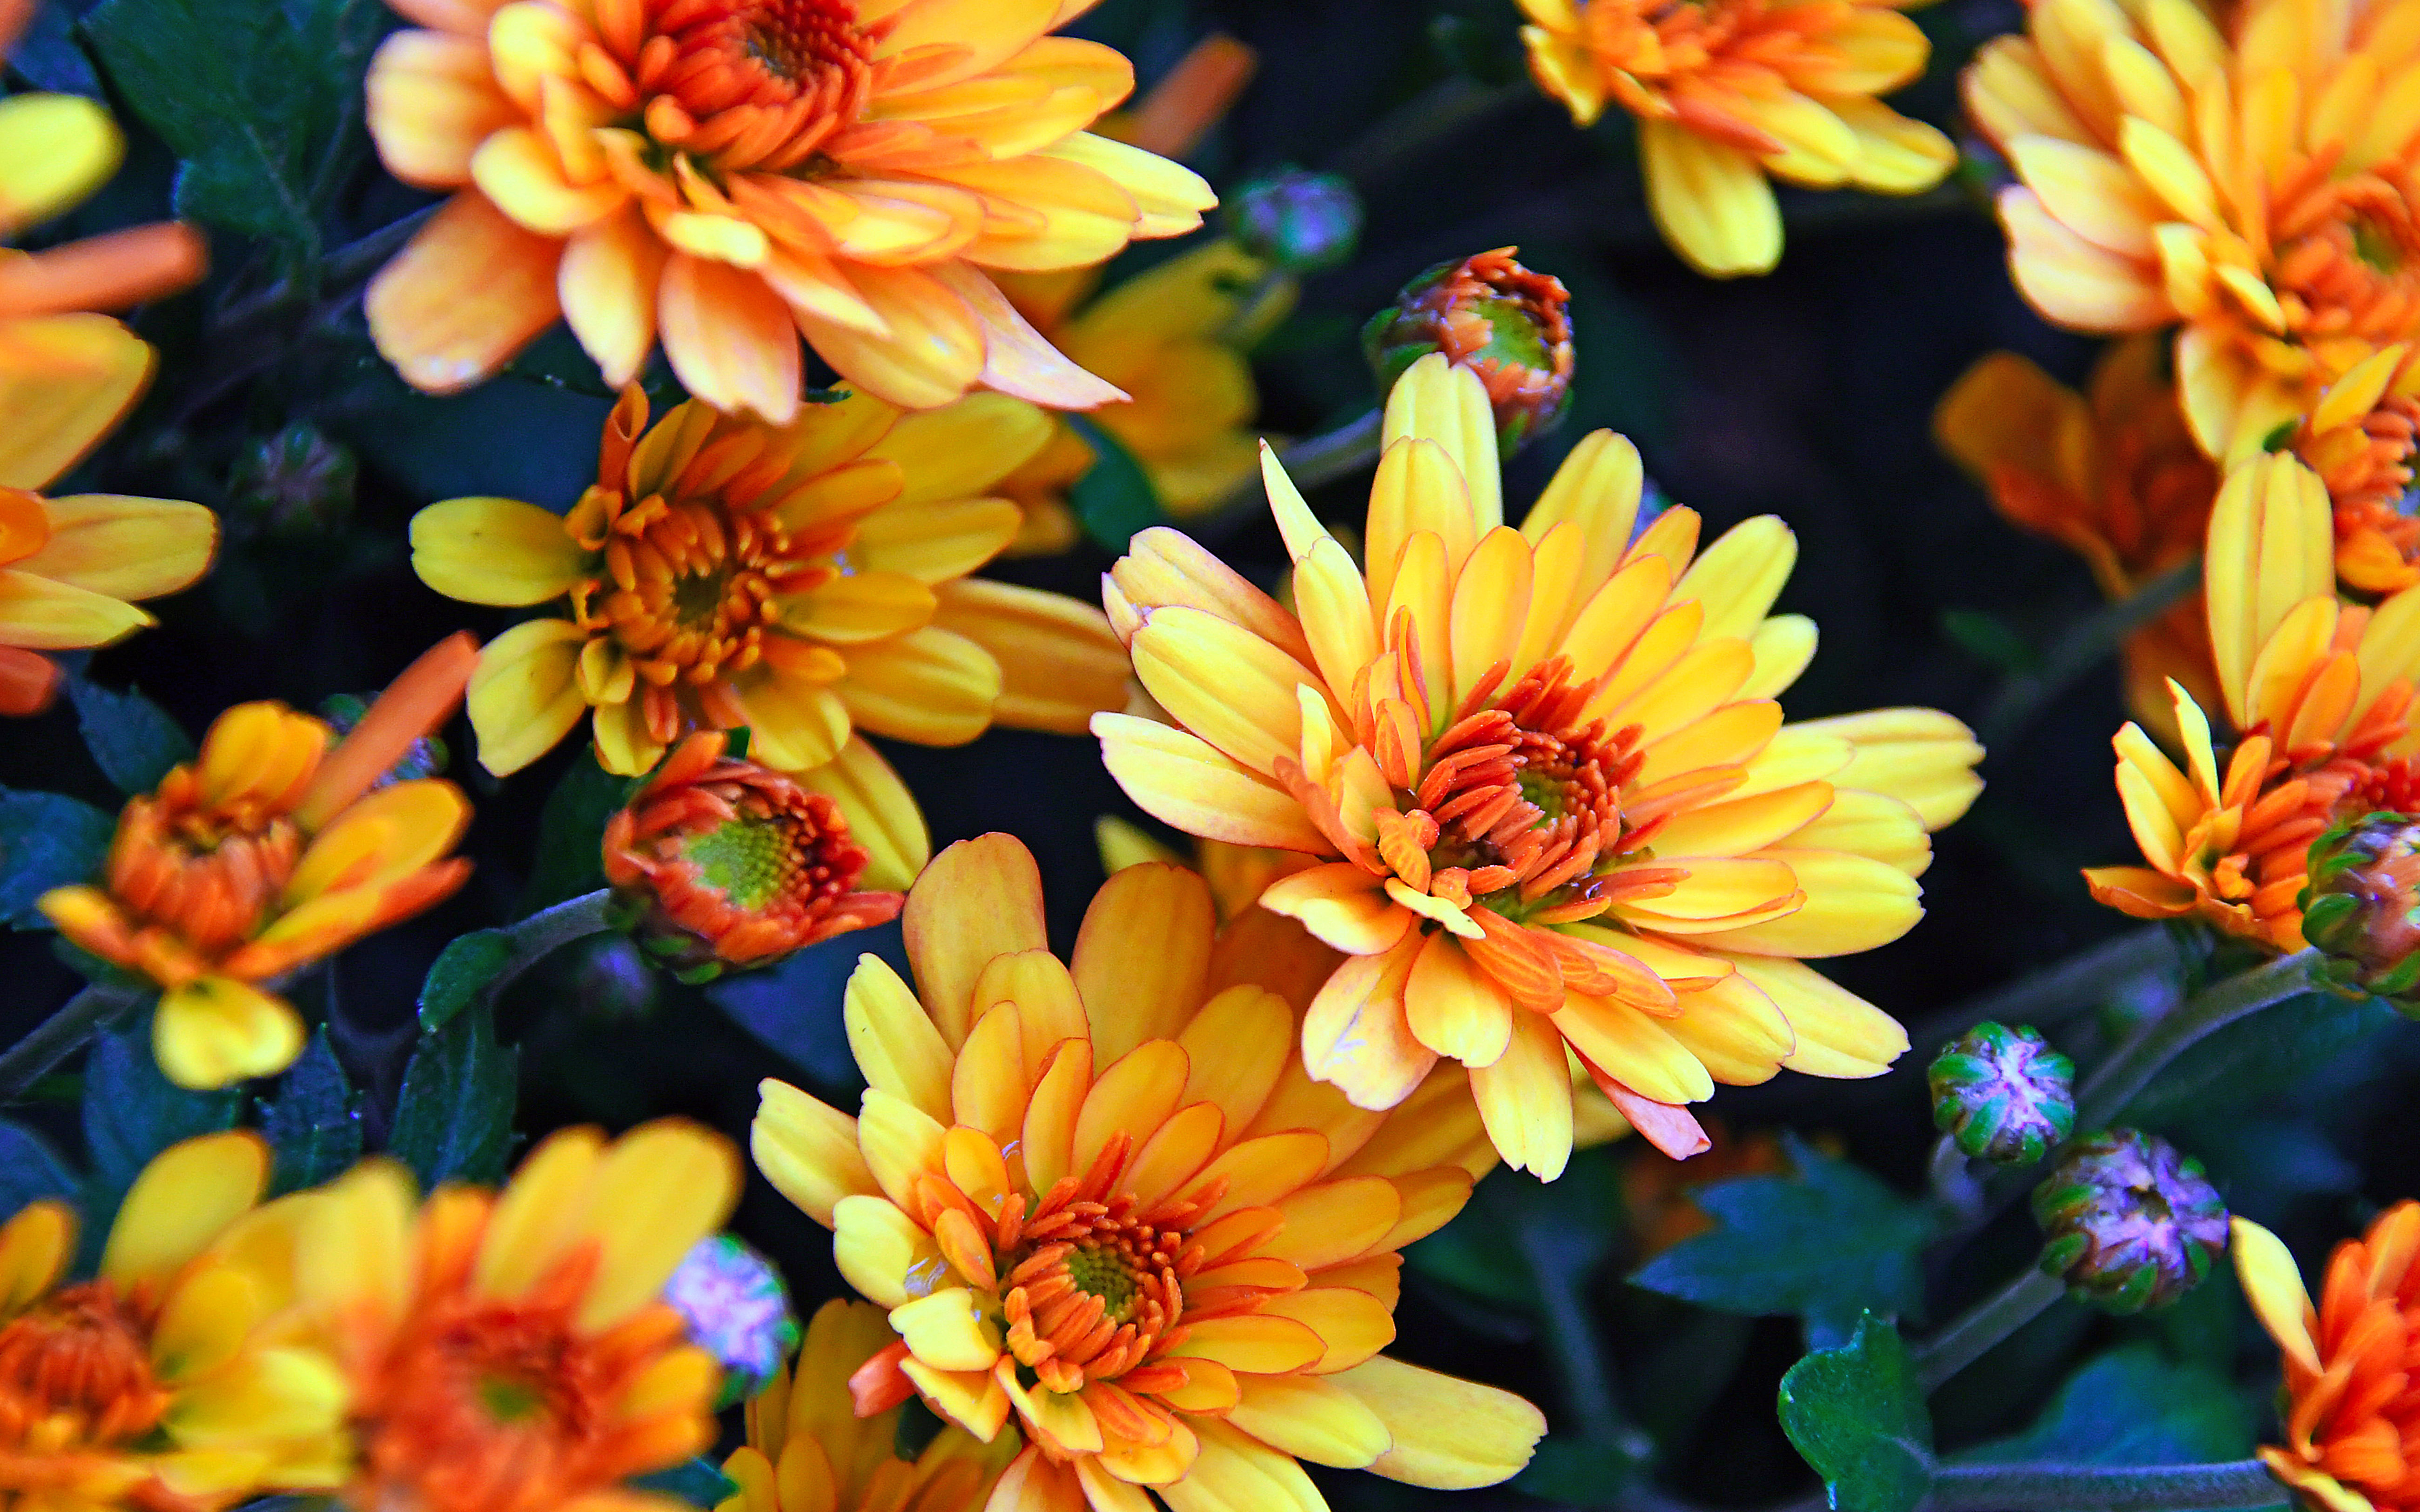 Chrysanthemums oranges Autumn Flowers 4к Ultra Hd Wallpapers For